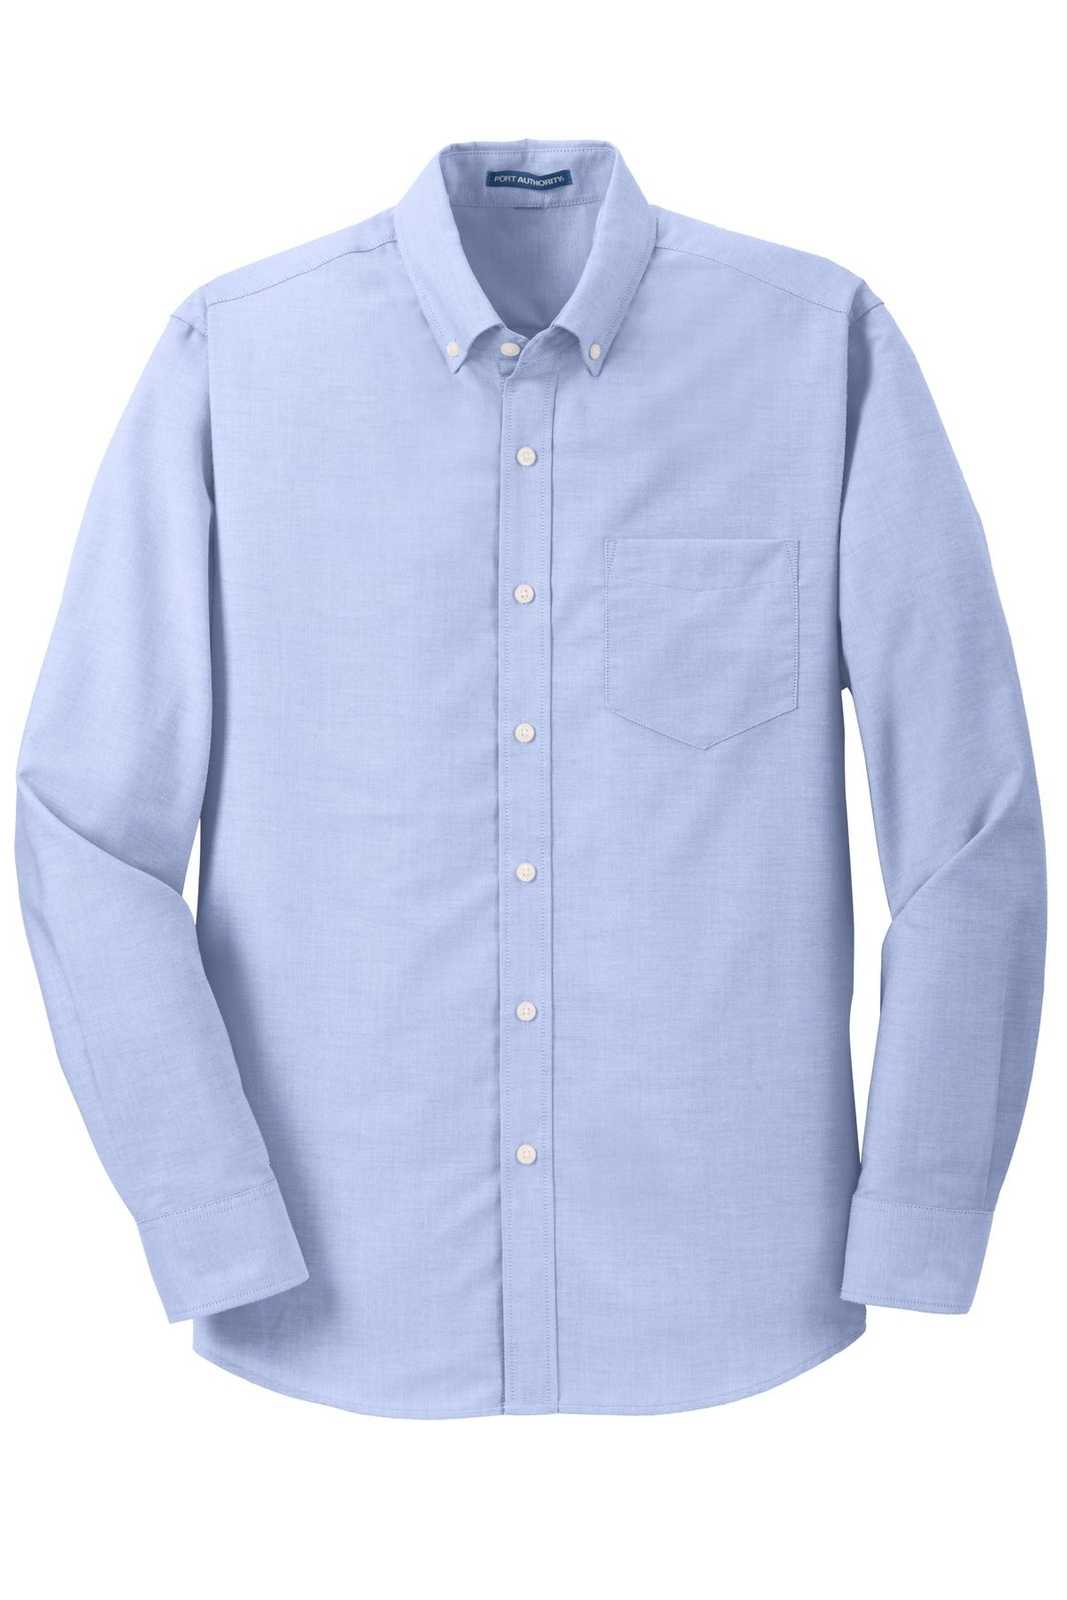 Port Authority TS658 Tall Superpro Oxford Shirt - Oxford Blue - HIT a Double - 5